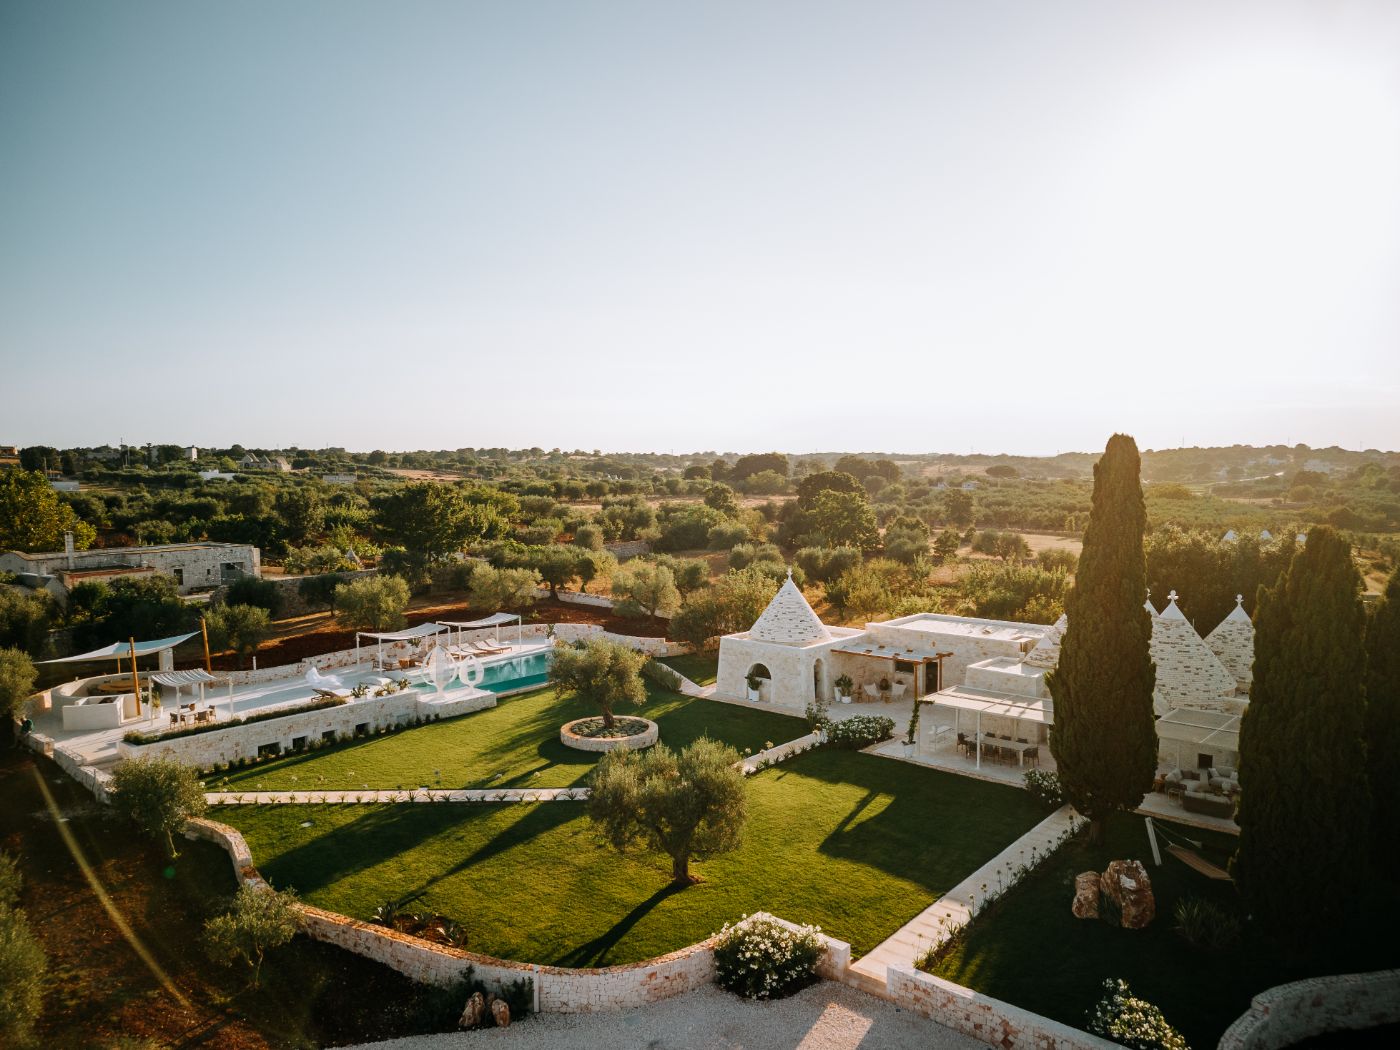 The grounds of Trulli Pomona from an aerial view.